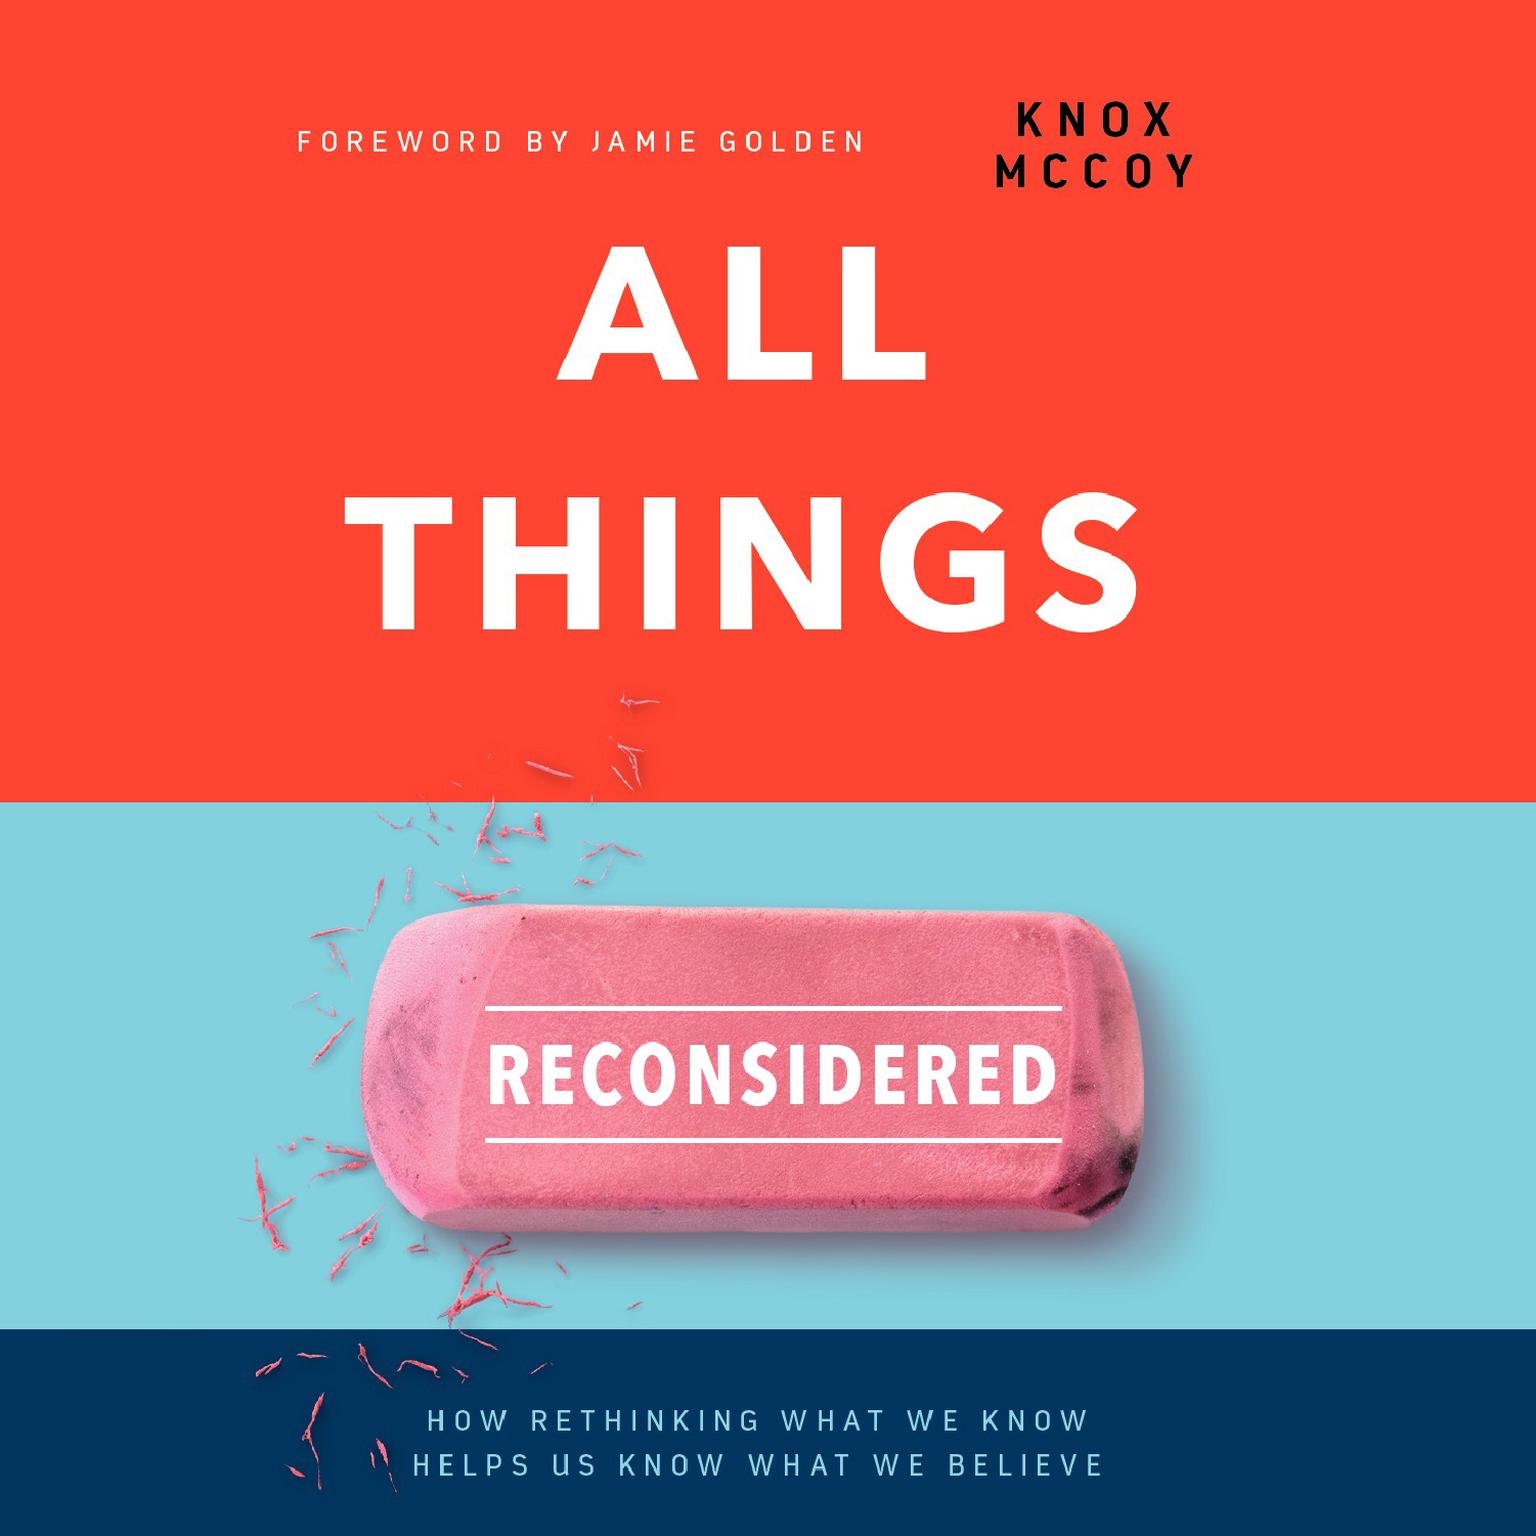 All Things Reconsidered: How Rethinking What We Know Helps Us Know What We Believe Audiobook, by Knox McCoy